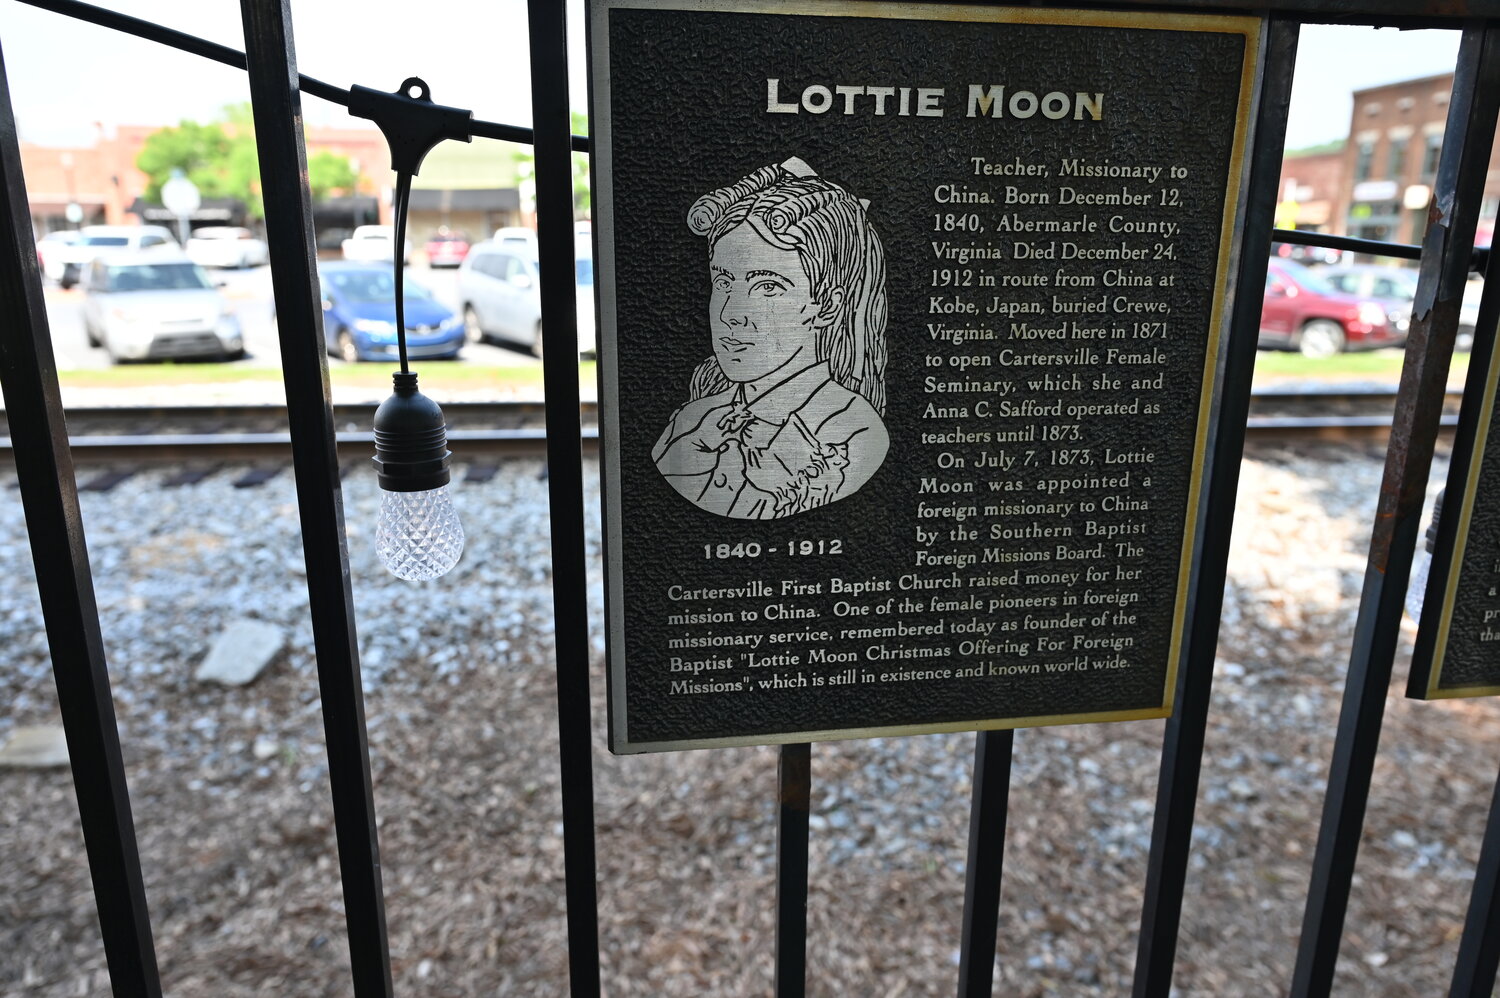 A memorial to Lottie Moon is on display in downtown Cartersville, Ga. on Thursday, May 11, 2023. (Index/Roger Alford)